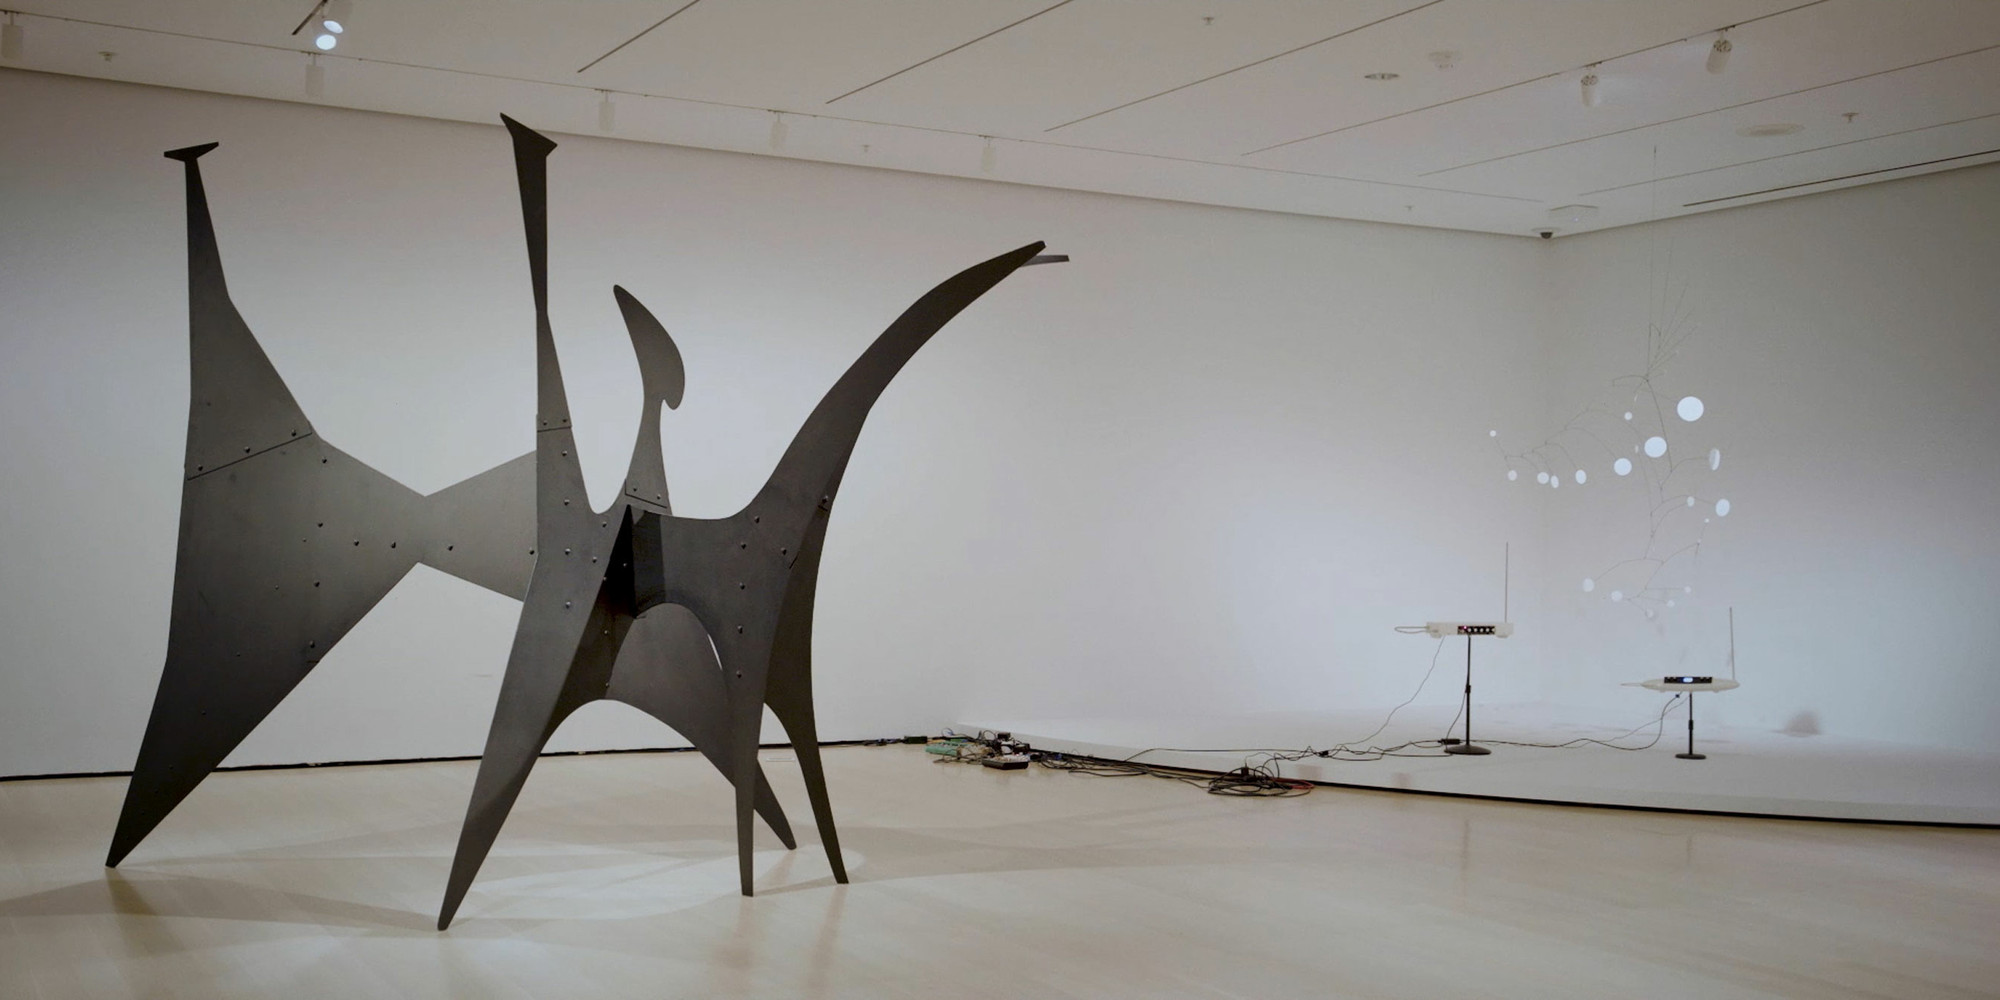 A still from the Calder Plays Theremin video. Shown, from left: Alexander Calder. Black Beast. 1940. Sheet metal, bolts, and paint. Calder Foundation, New York. © 2021 Calder Foundation, New York/Artists Rights Society (ARS), New York; Alexander Calder. Snow Flurry, I. 1948. Painted sheet steel and steel wire. The Museum of Modern Art, New York. Gift of the artist. © 2021 Calder Foundation, New York/Artists Rights Society (ARS), New York